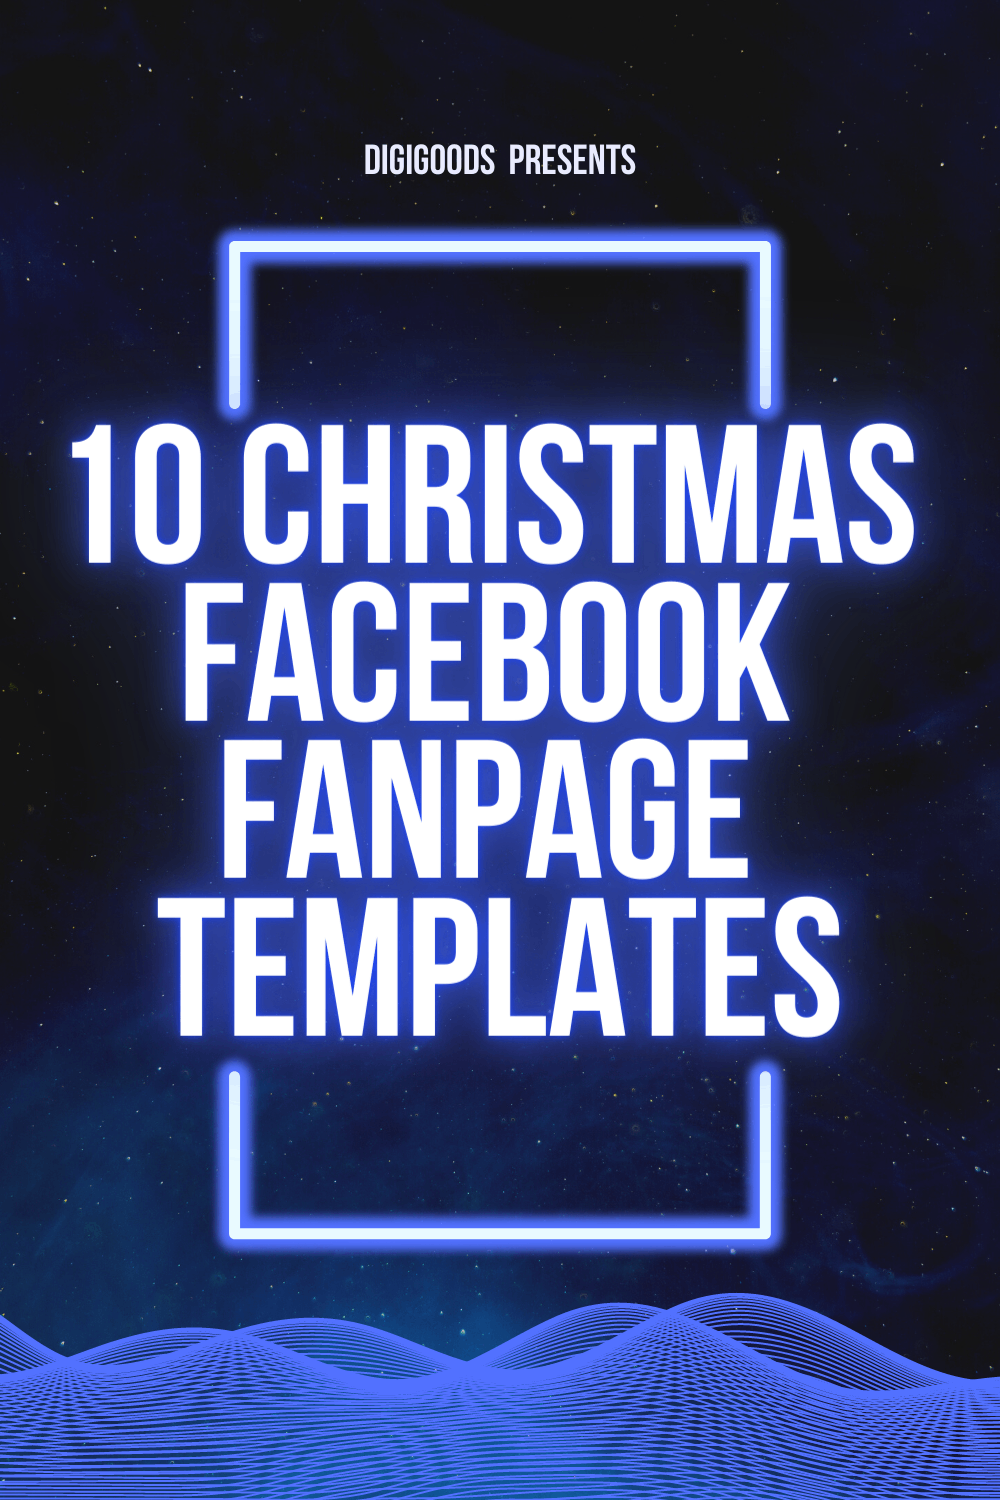 Christmas facebook fanpage templates of pinterest.